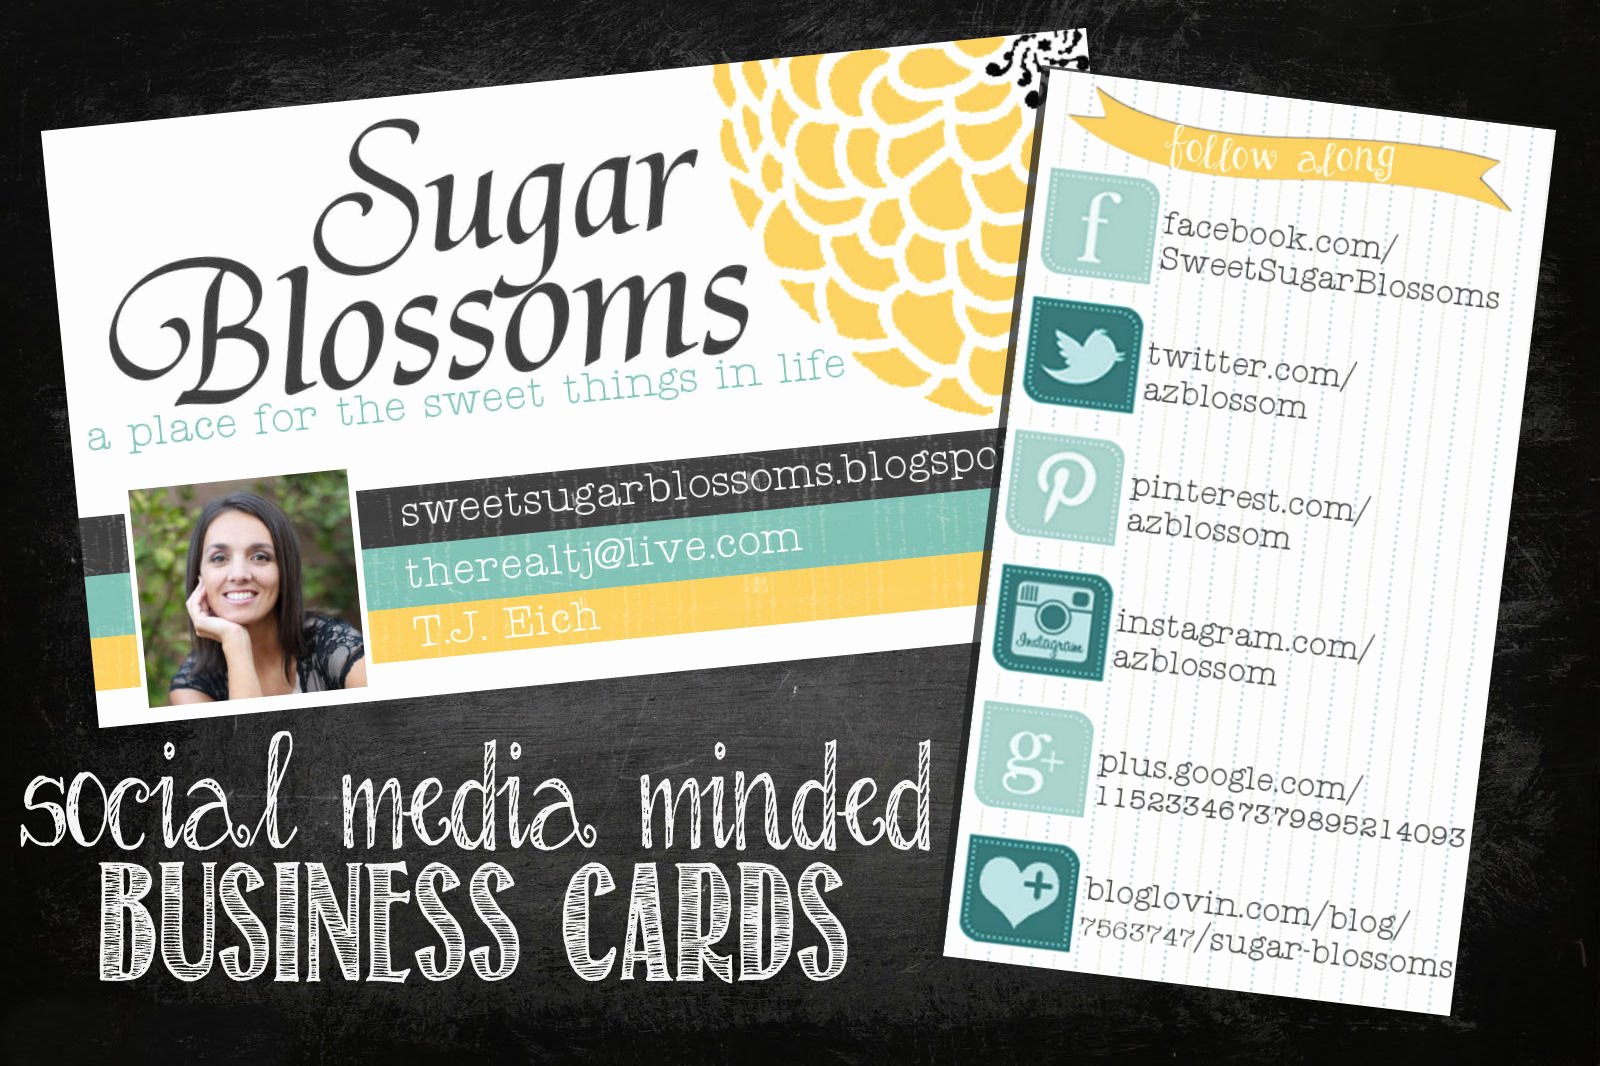 Social Media On Business Cards Luxury Sweet Sugar Blossoms social Media Business Cards